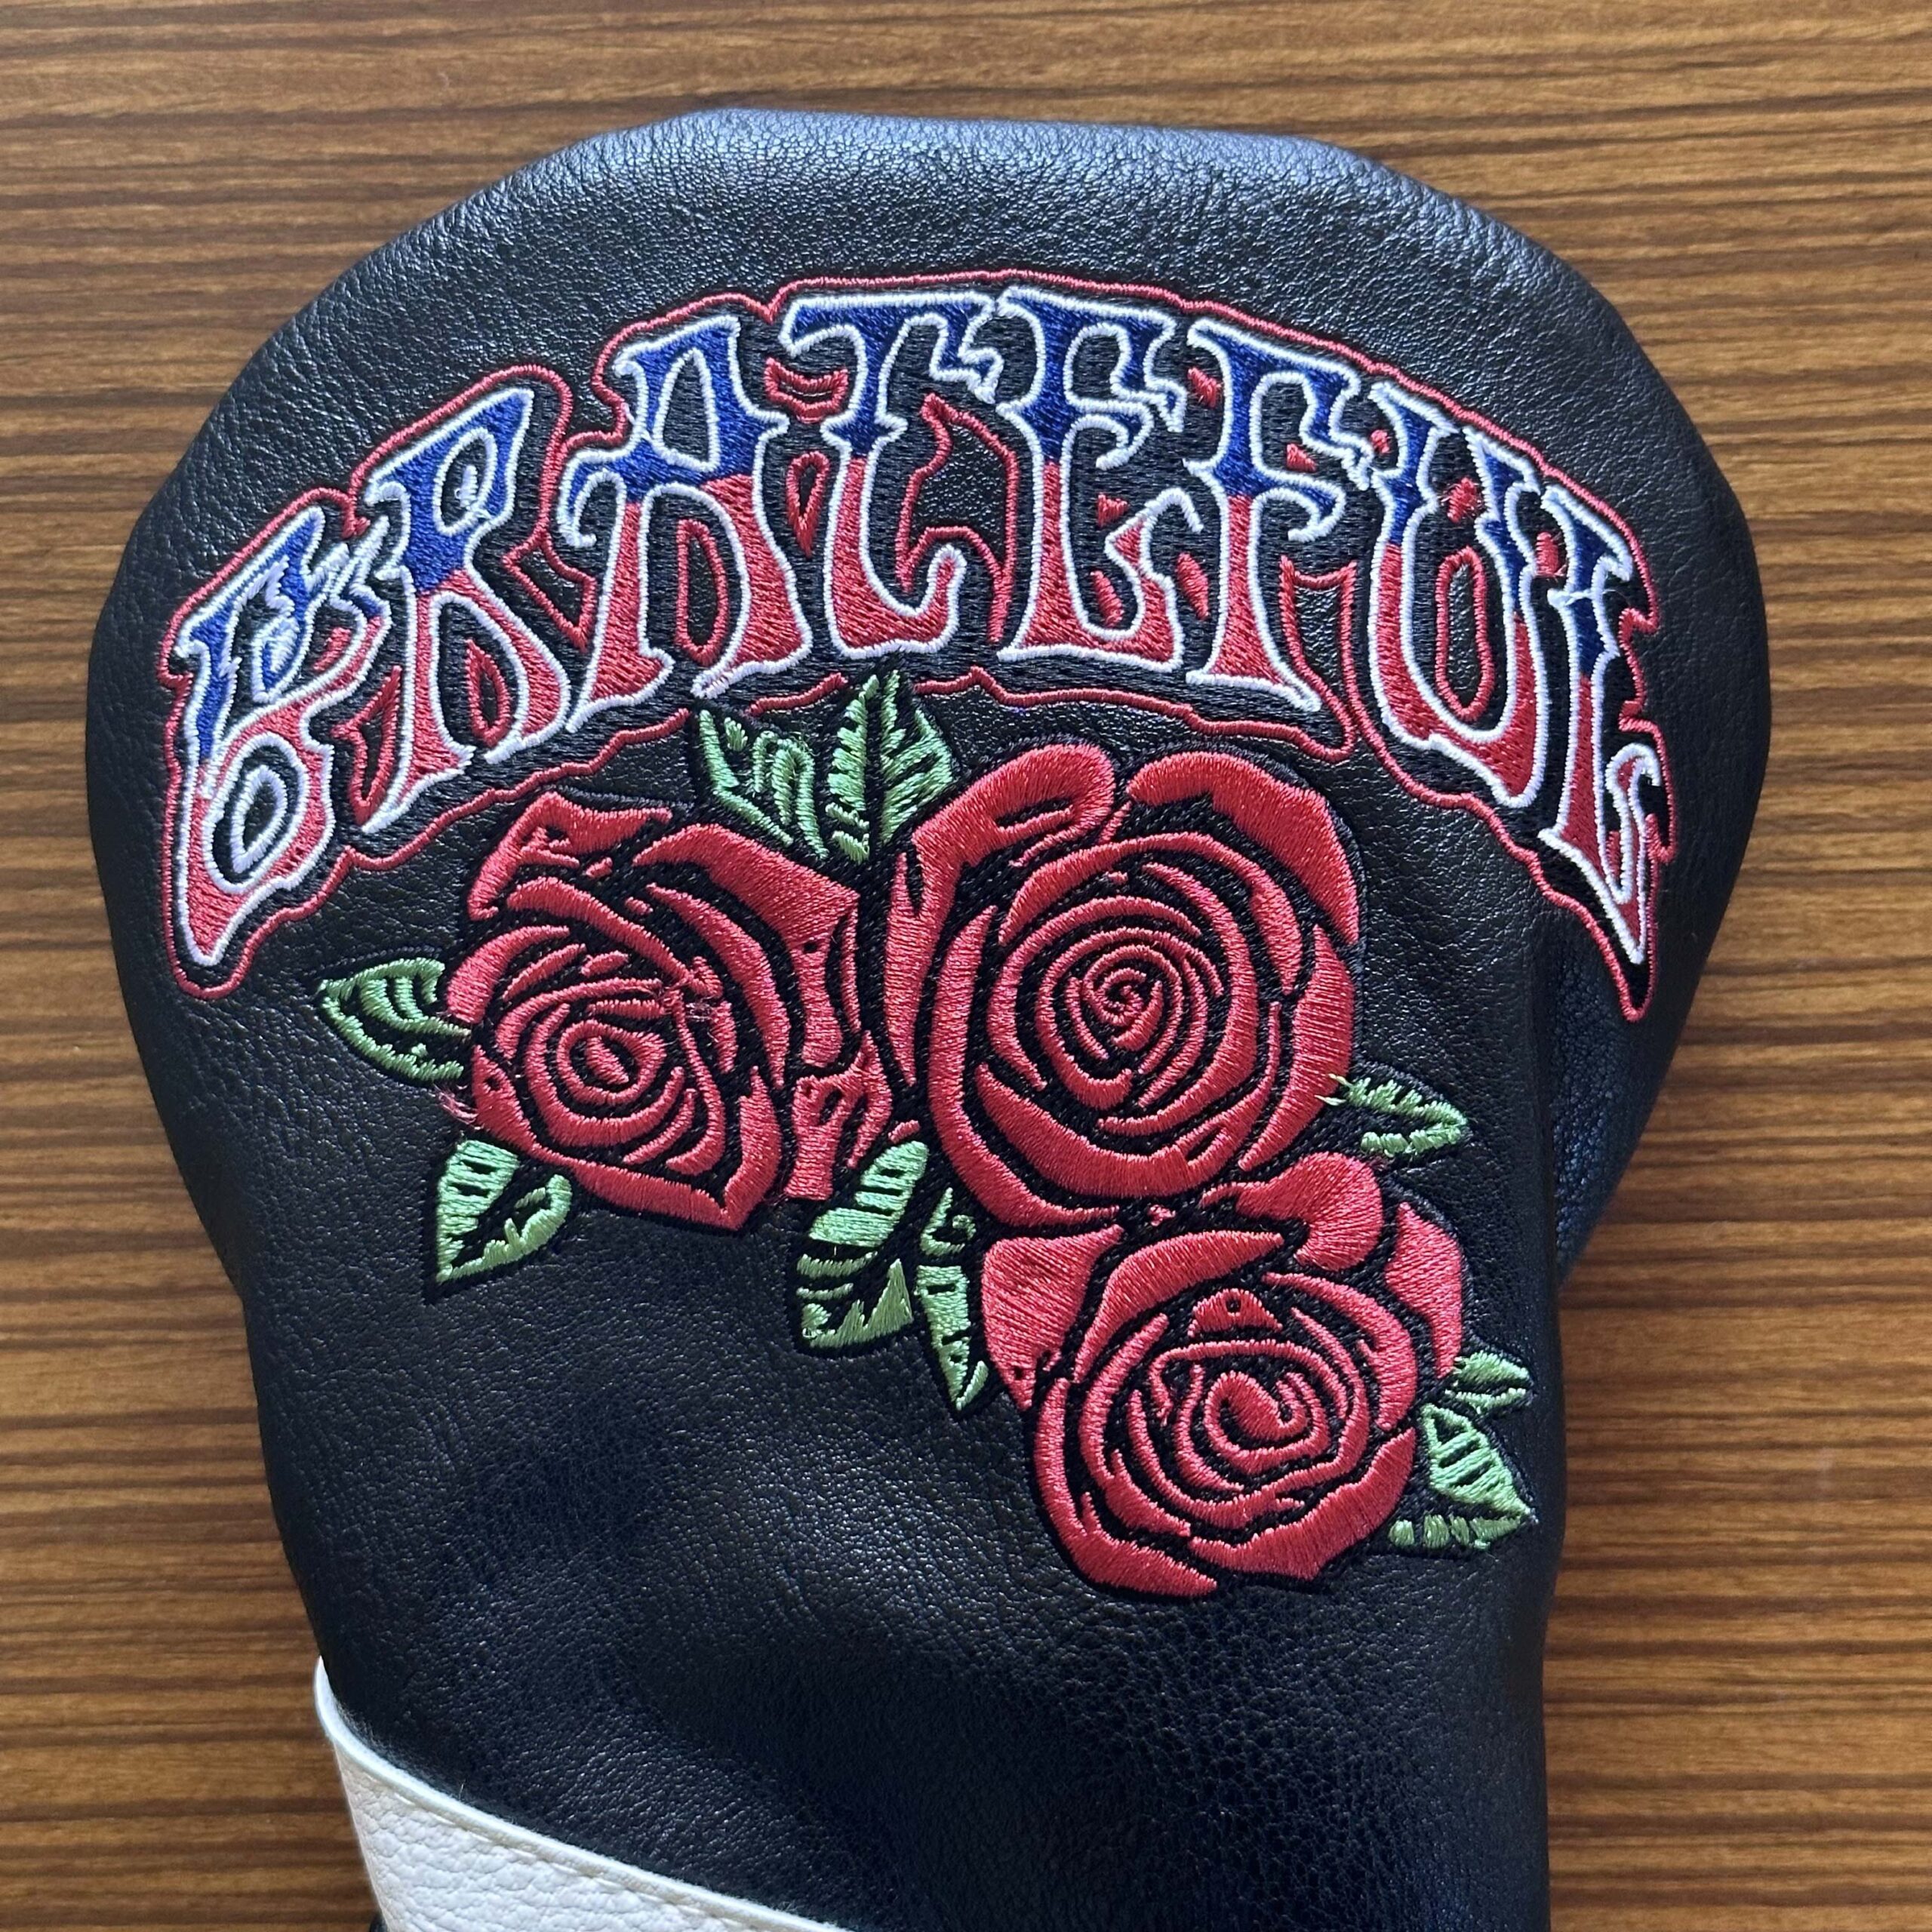 Dead Inspired - Leather Grateful Roses Golf Mallet Putter Head Cover - FREE  U.S. SHIPPING! - Phunky Threads